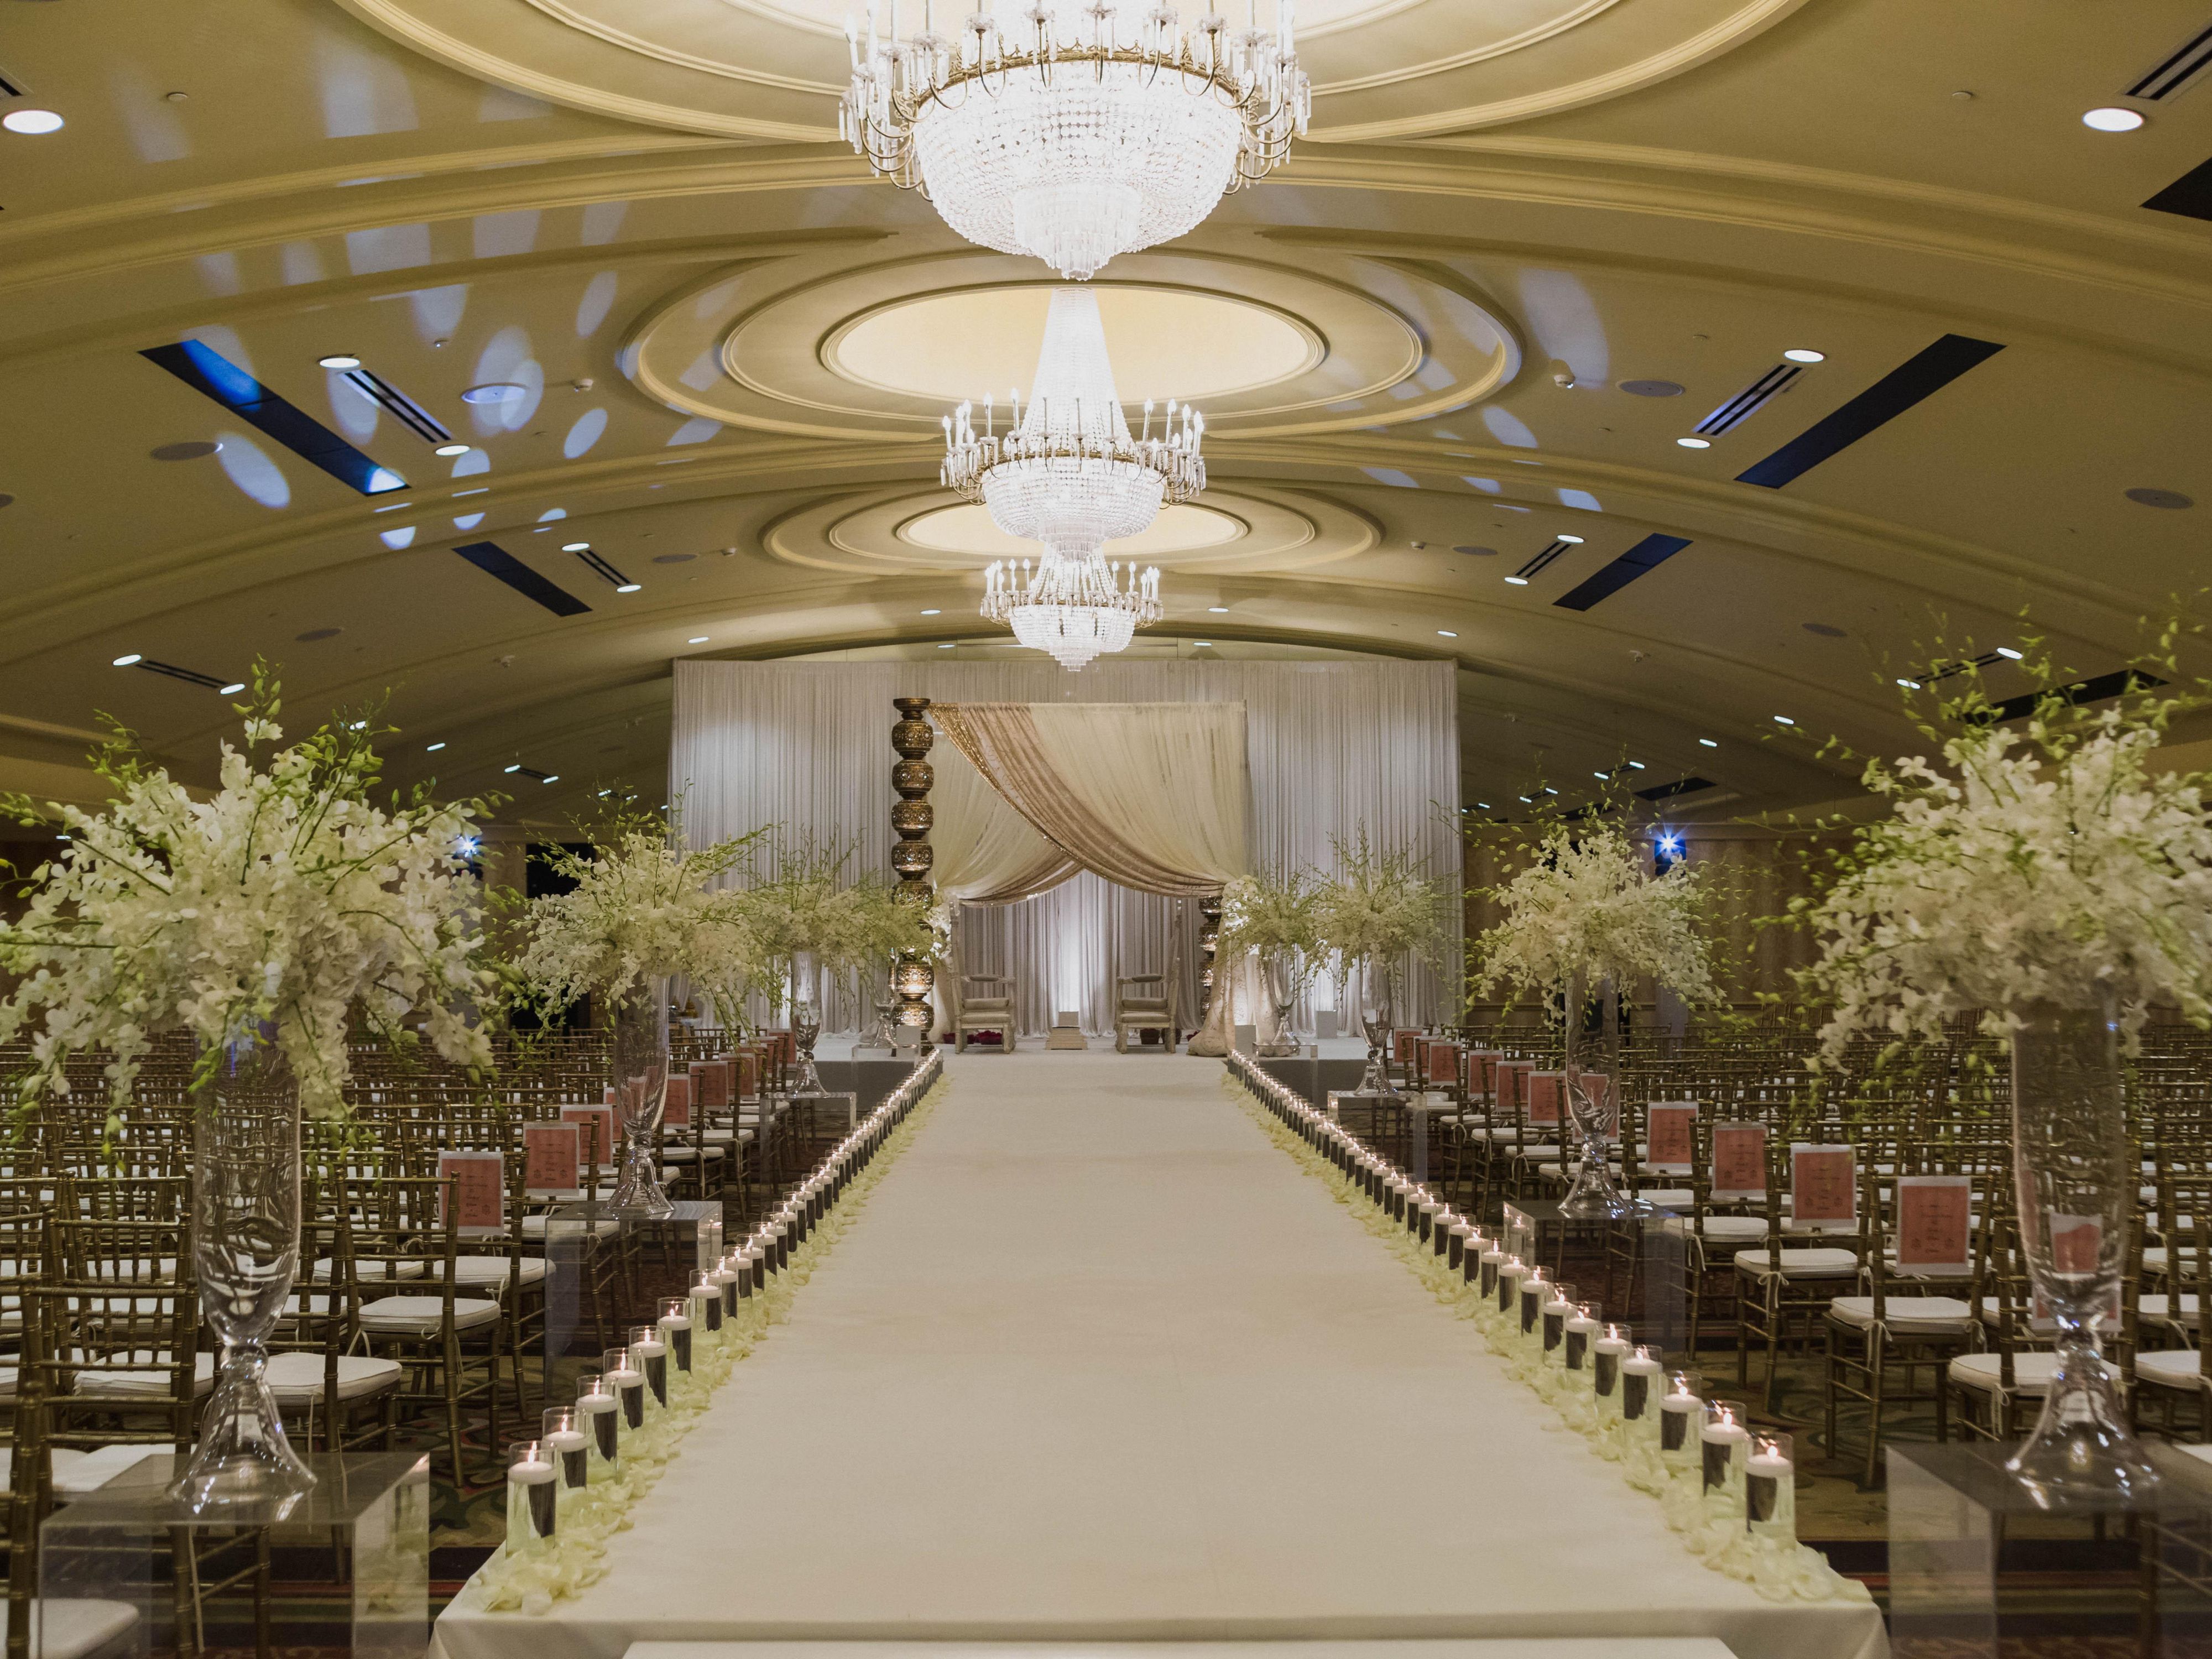 Crowne Plaza Louisville Expo ctr. is the ideal venue for your wedding or special occasion.  With two exquisite ballrooms, amazing cuisine, easy access, free parking for guests, and a dedicated onsite planner. We also have lovely event spaces for every important occasion from 10 to 1200 people.